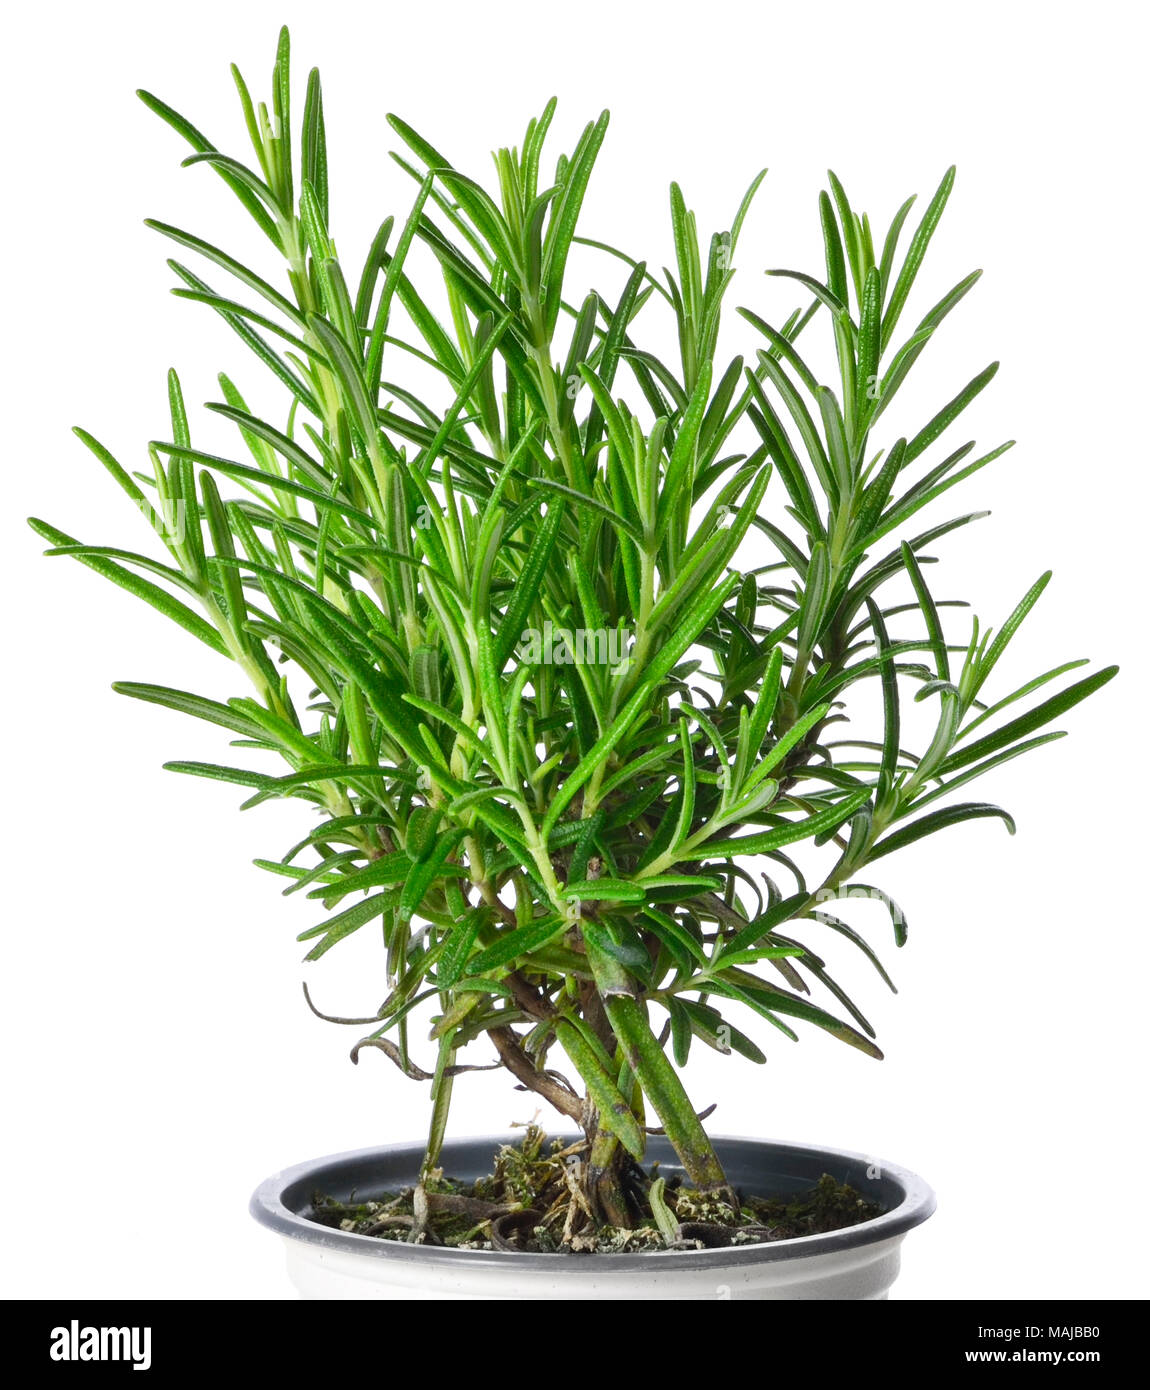 Fresh rosemary plant or bush in a plant pot, isolated herb on white background, cooking herb. Stock Photo